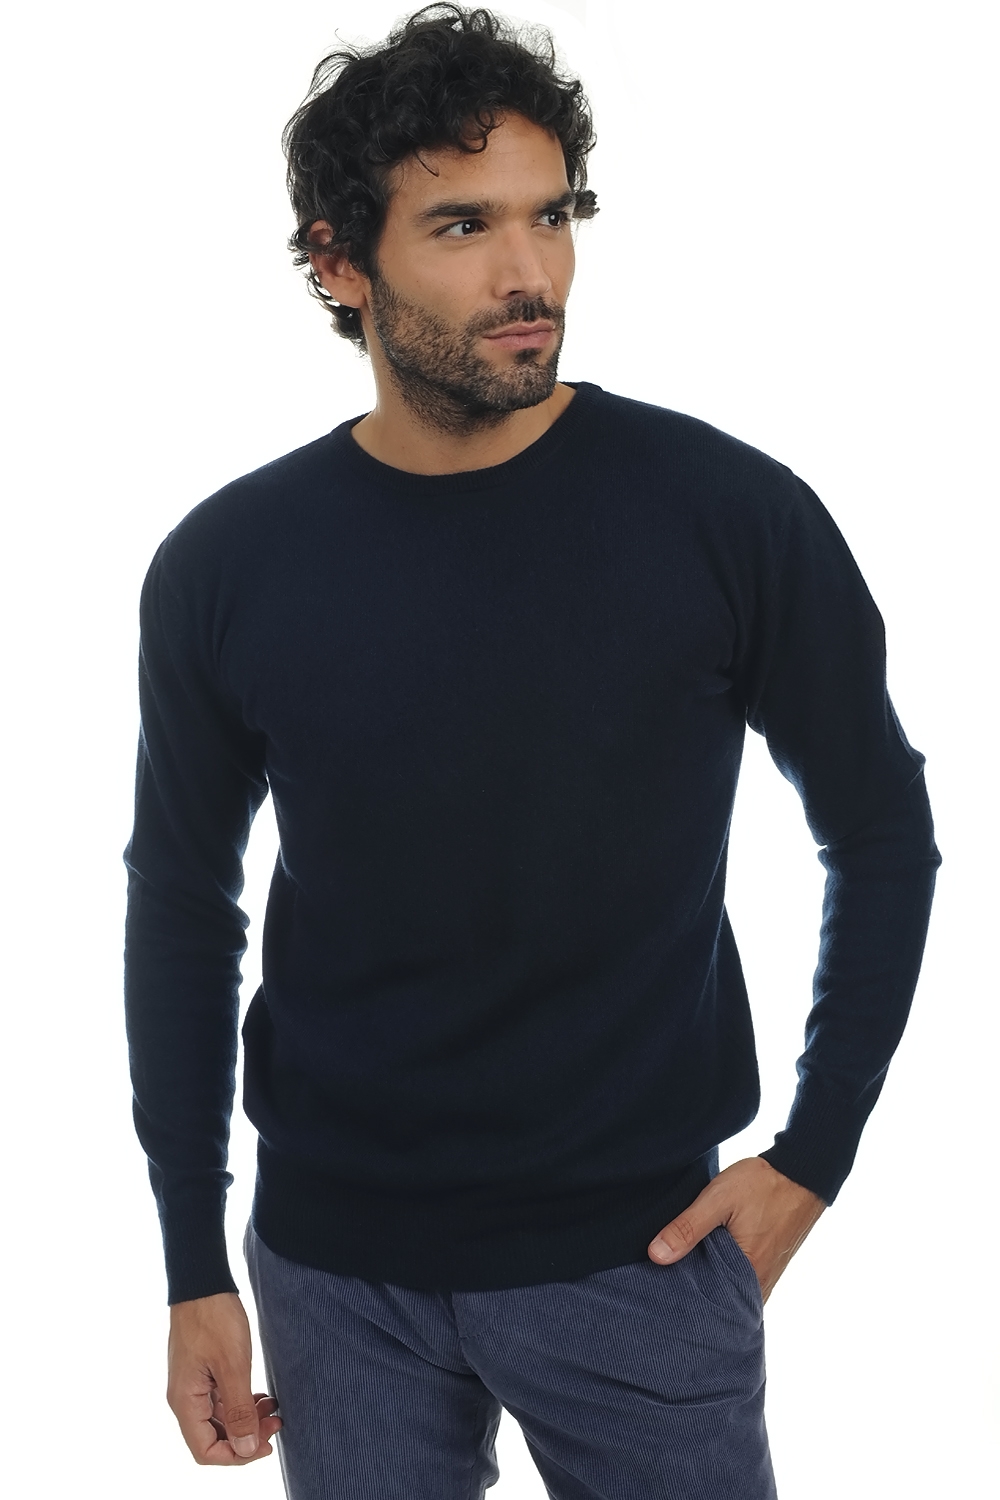 Cachemire pull homme col rond keaton marine fonce 2xl